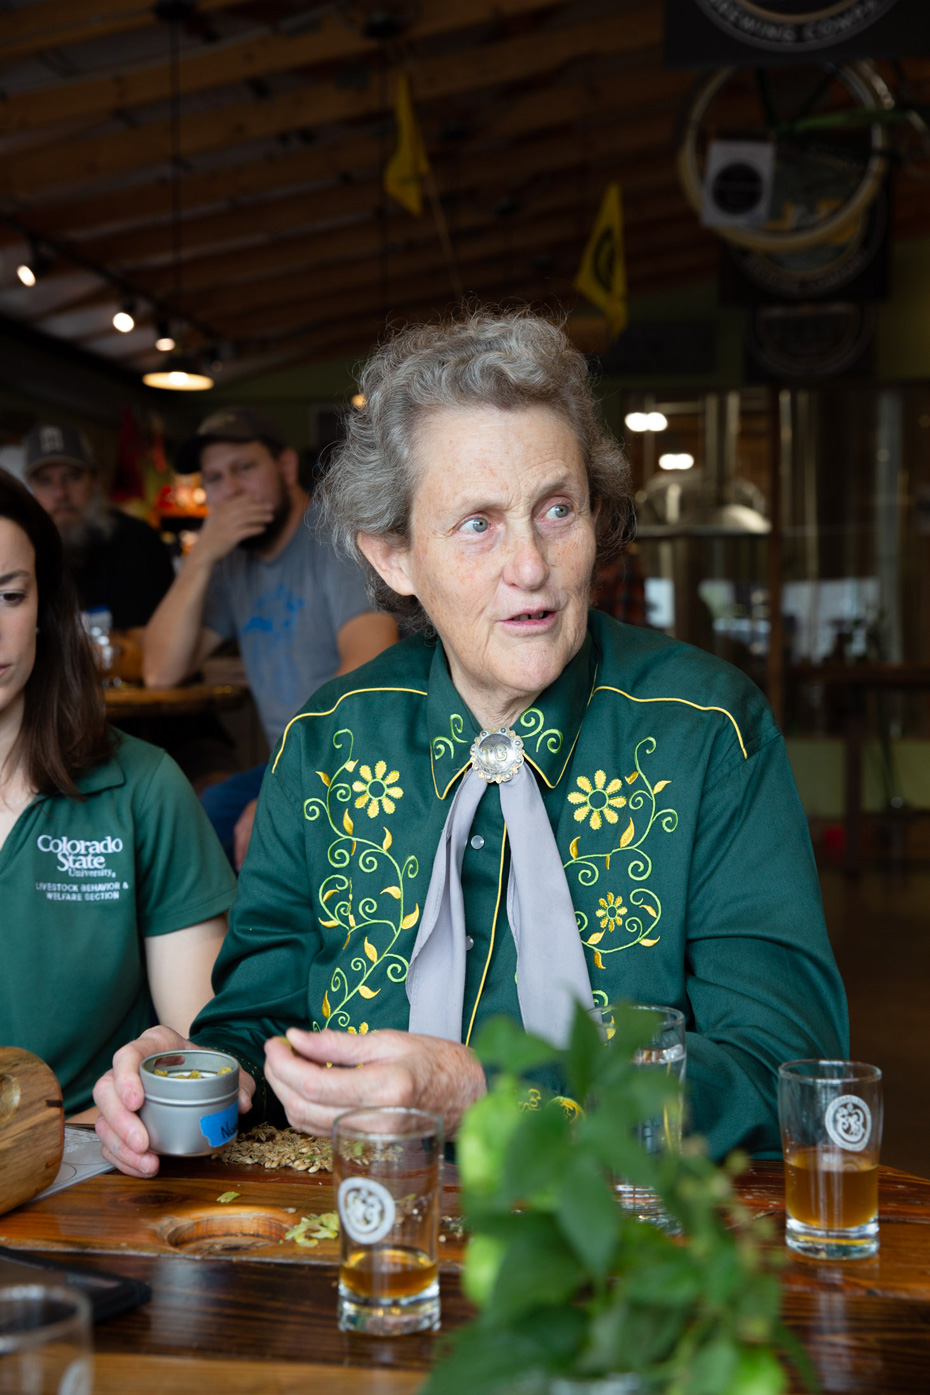 Temple Grandin discussing beer malt at Horse and Dragon Brewery in Fort Collins, Colorado - John Robson Editorial Photography